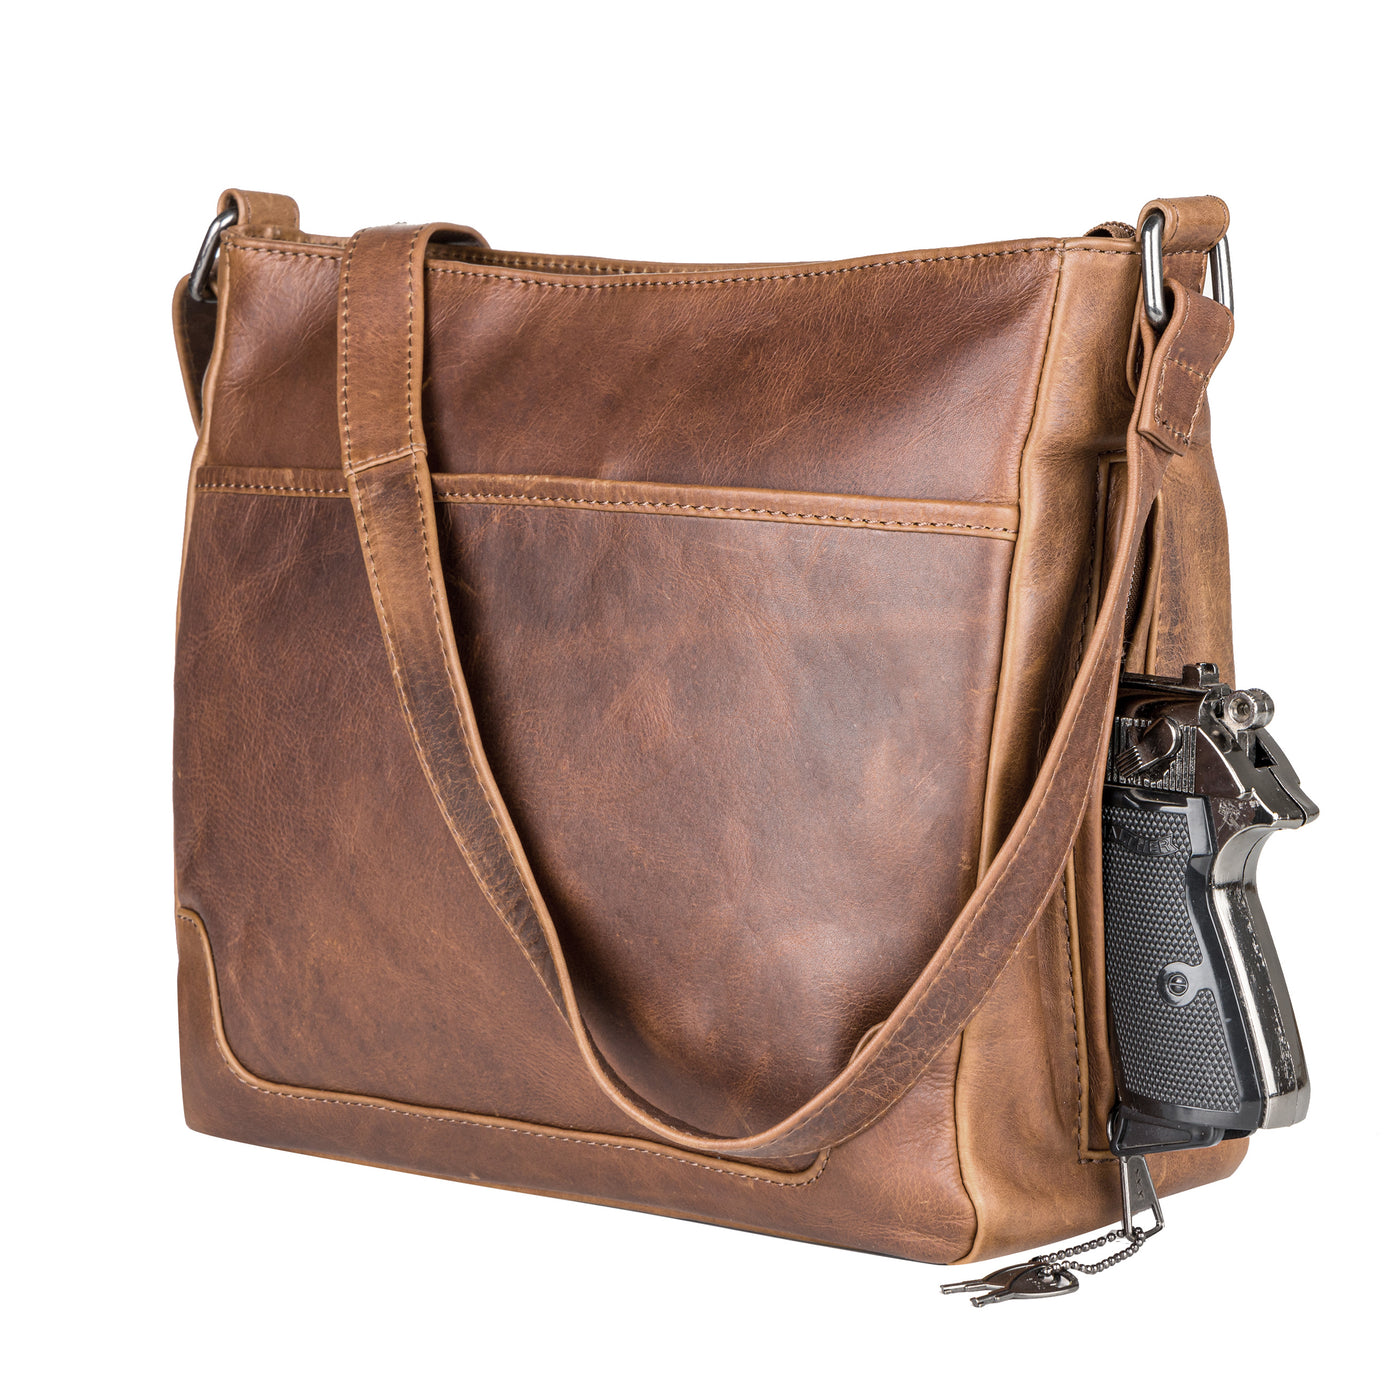 Concealed Carry Lydia Leather Crossbody - YKK Locking Zippers and Universal Holster - Soft Leather conceal and carry bag - Tactical womans purse for pistol - Concealed Carry Purse - most popular crossbody bag - crossbody handgun bag - crossbody bags for everyday use - Easy CCW - Fast Draw Bag - Secure Gun Bag